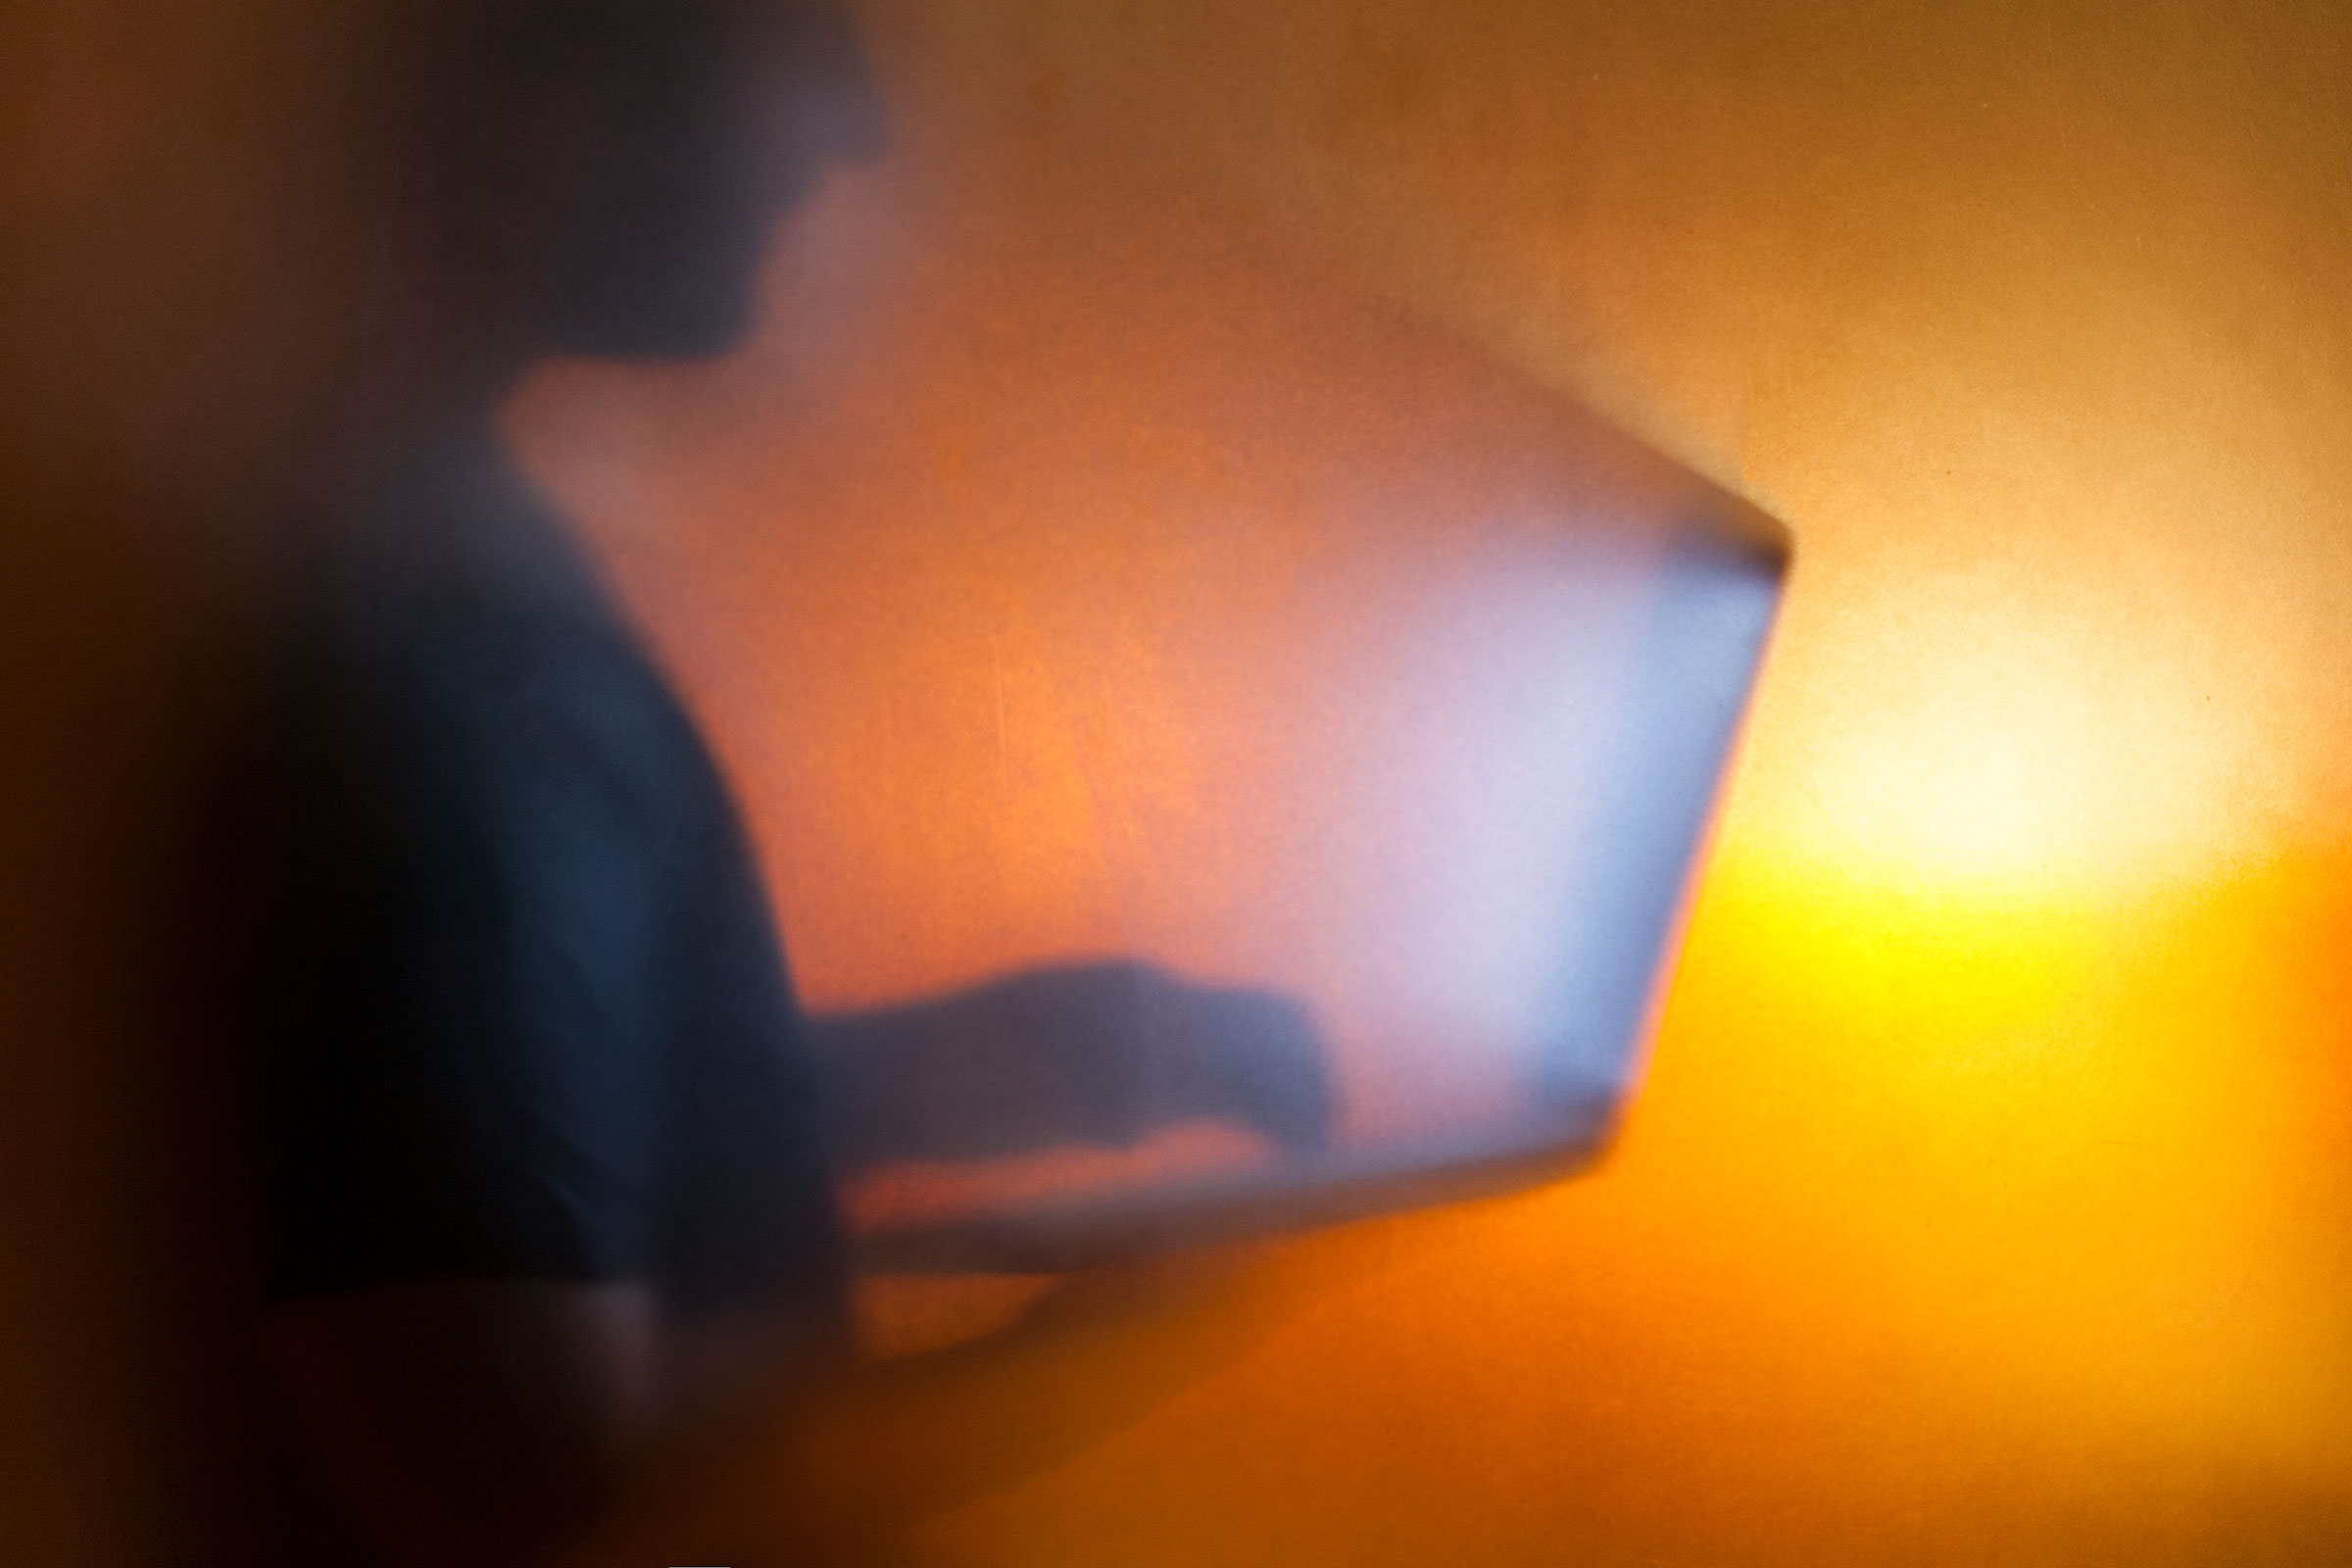 Man using laptop behind translucent glass with warm background